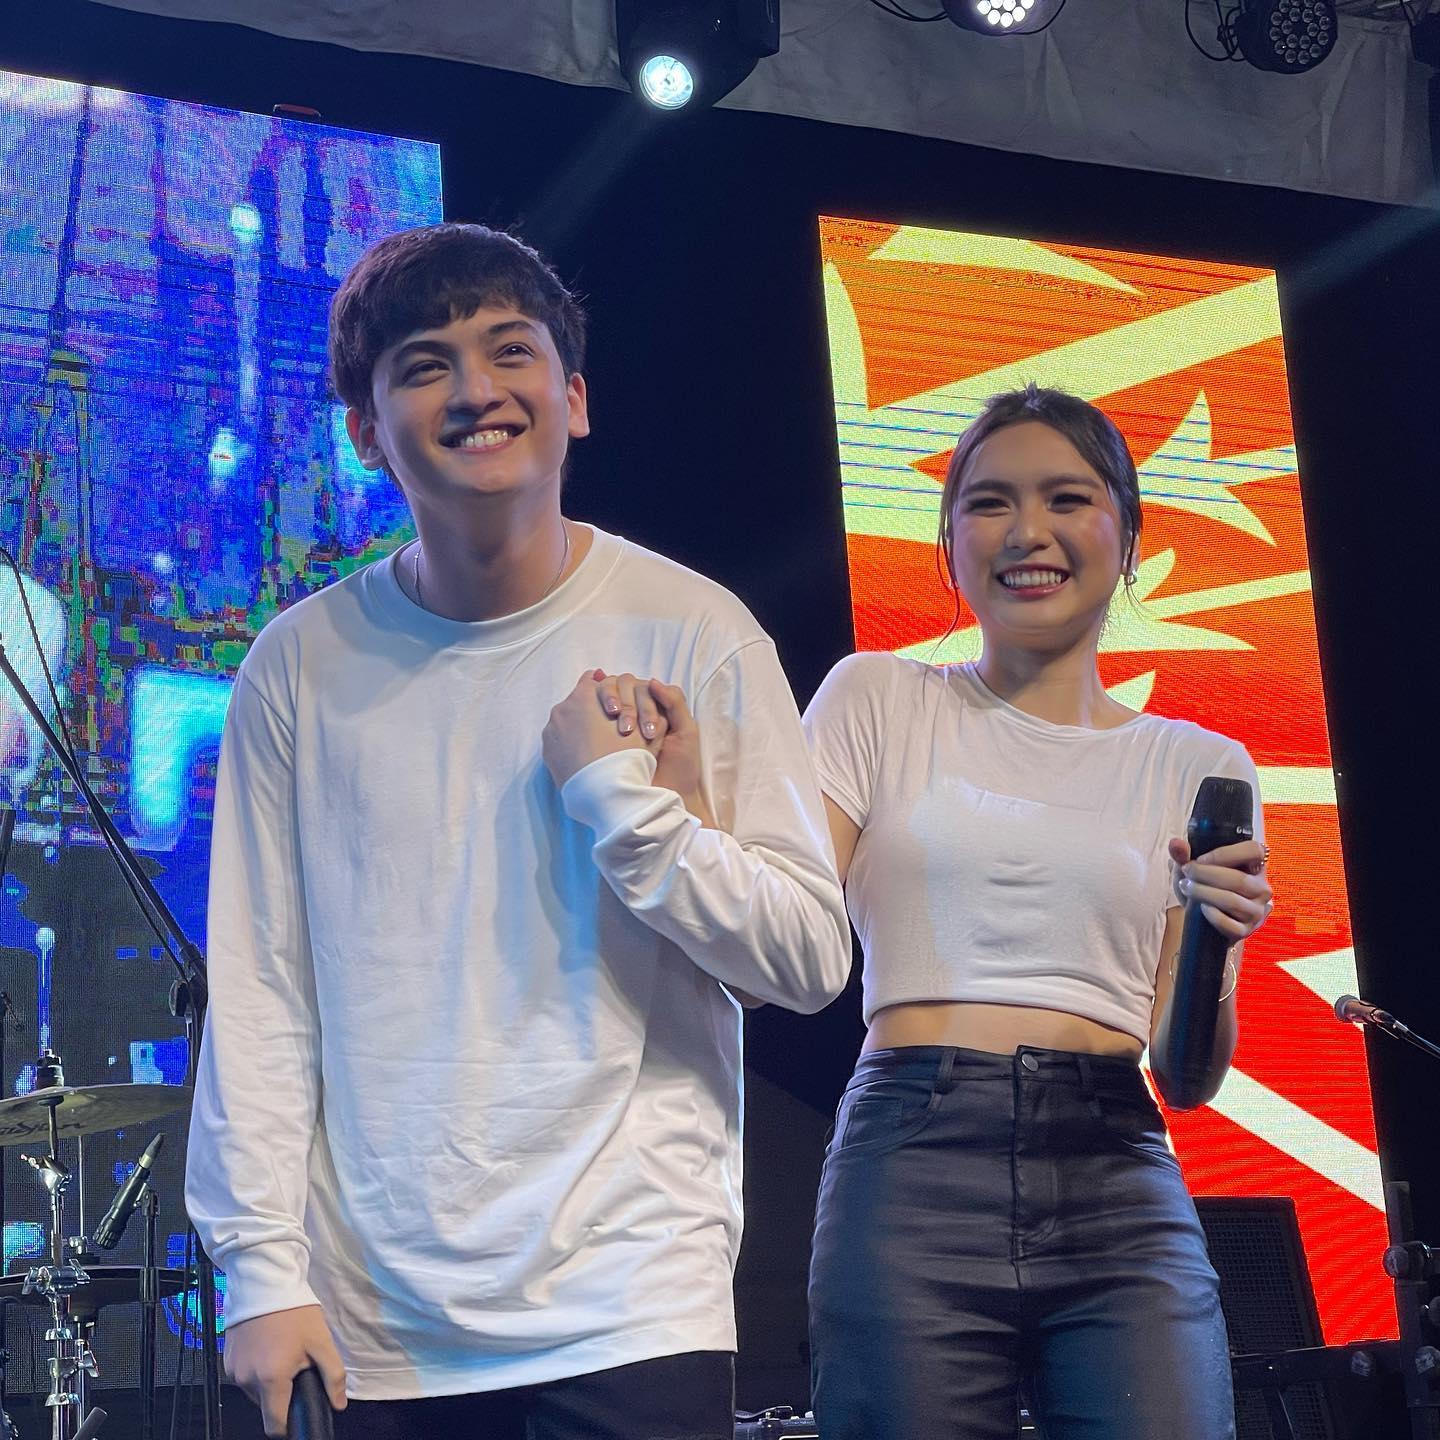 FRANSETH BRINGS KILIG TO THE FANS